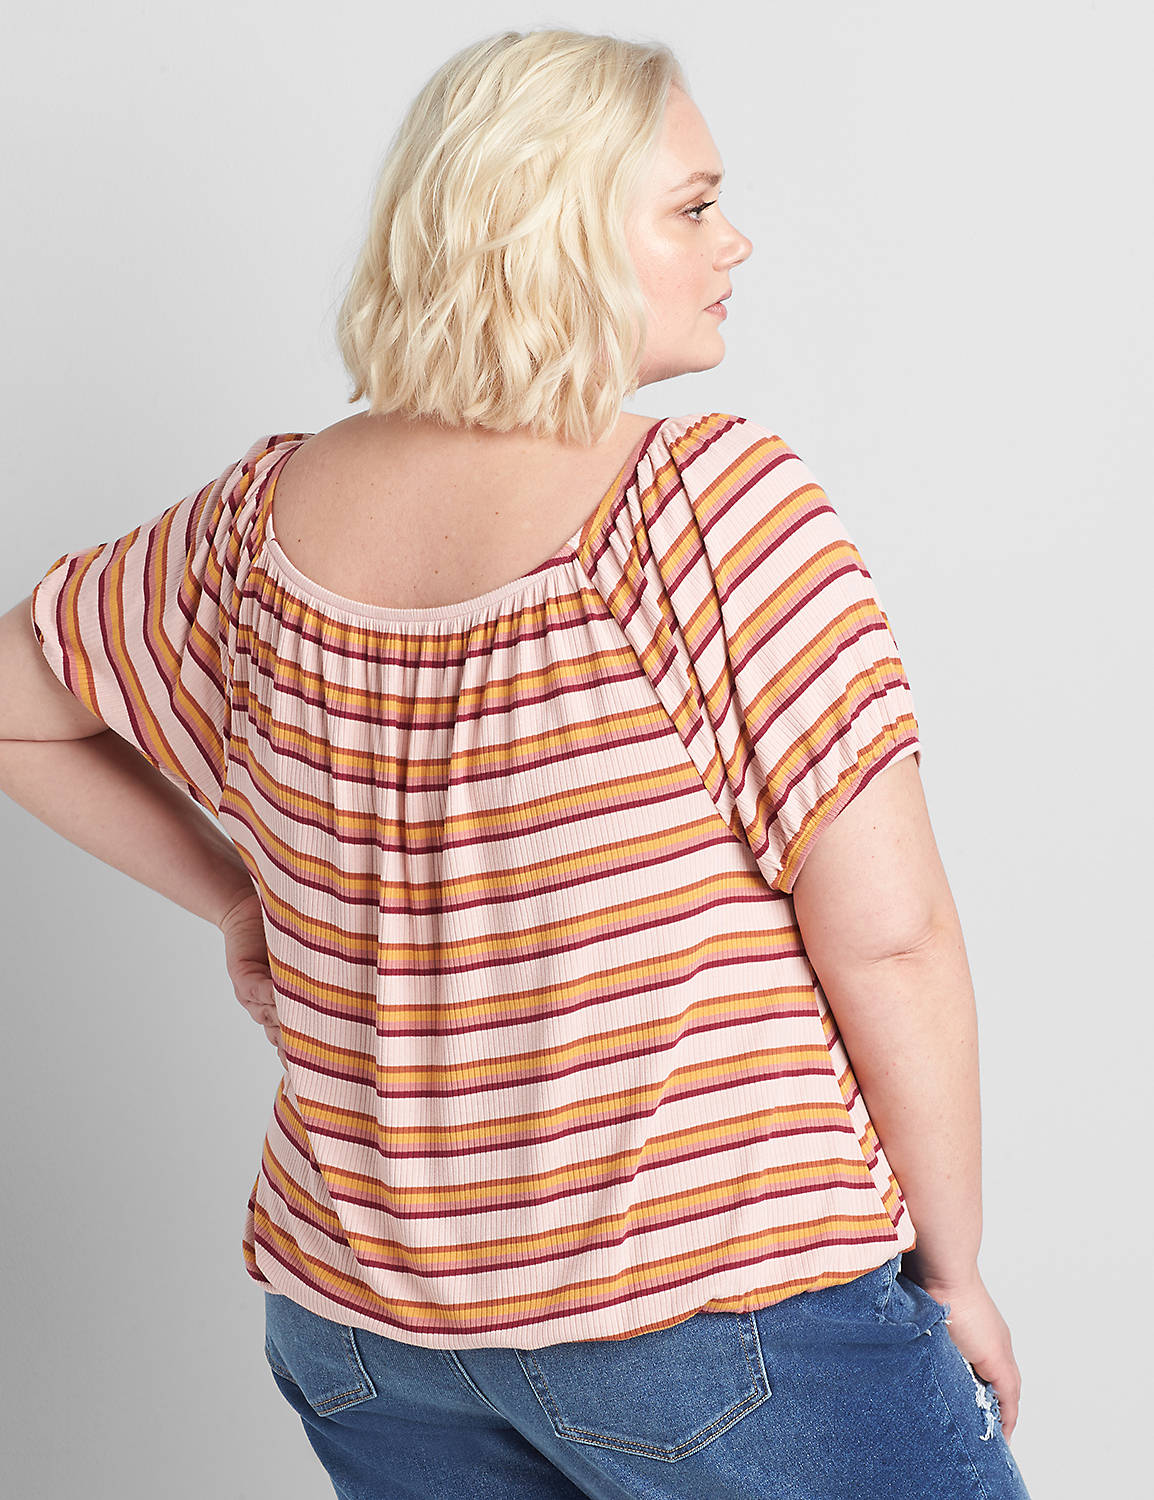 Striped Square Tie-Neck Top Product Image 2